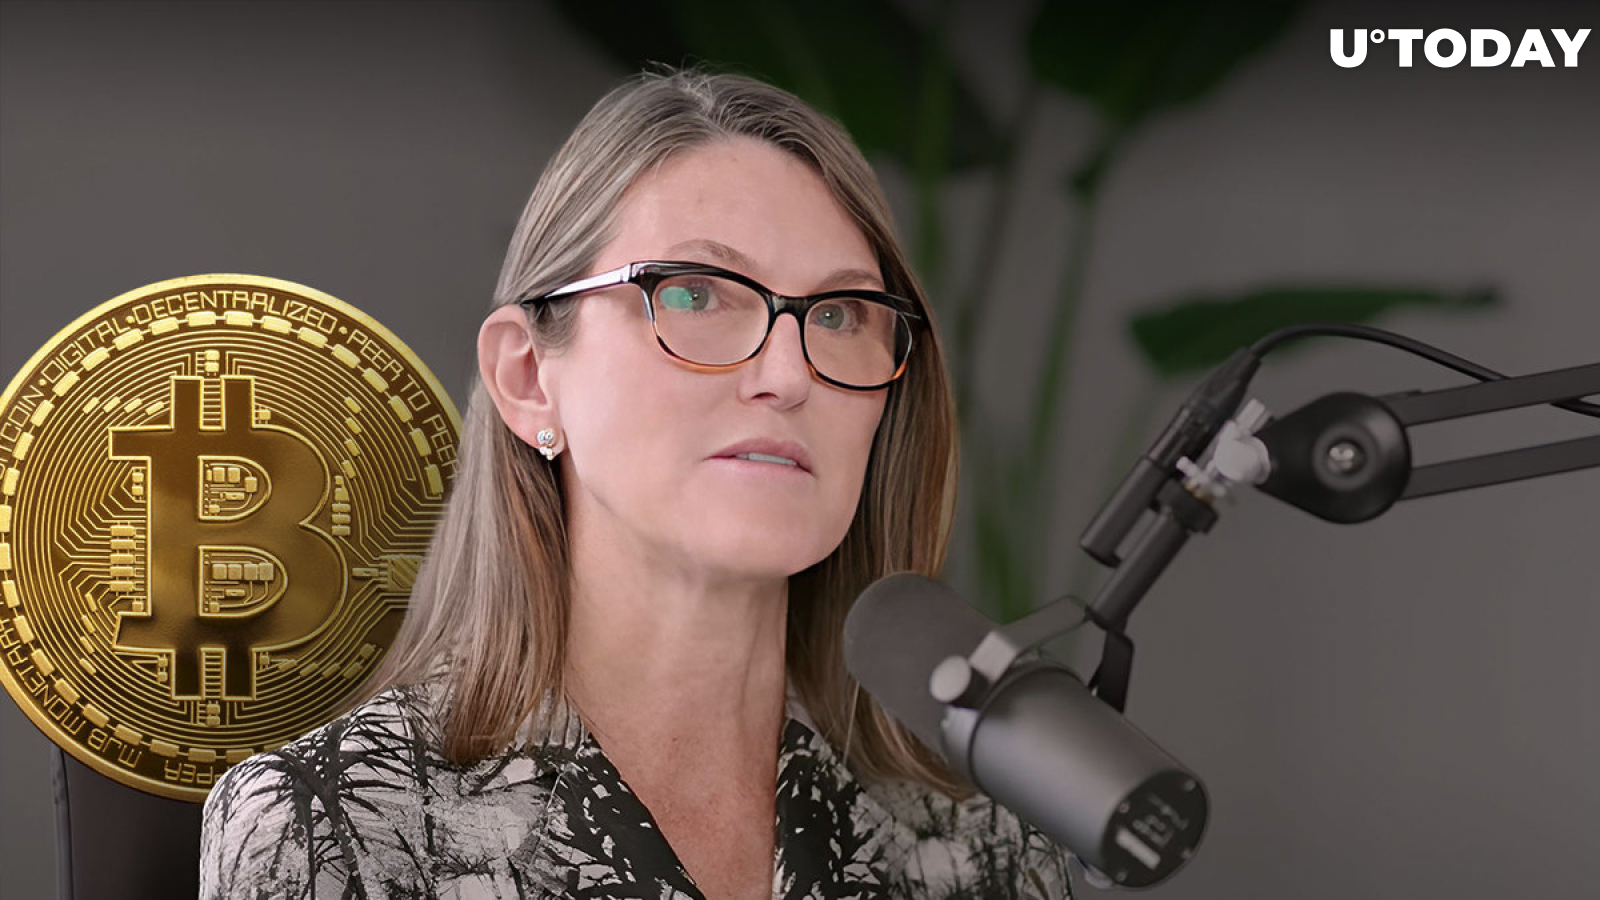 Bitcoin (BTC) Price Predicted to Reach $600,000 by Cathie Wood